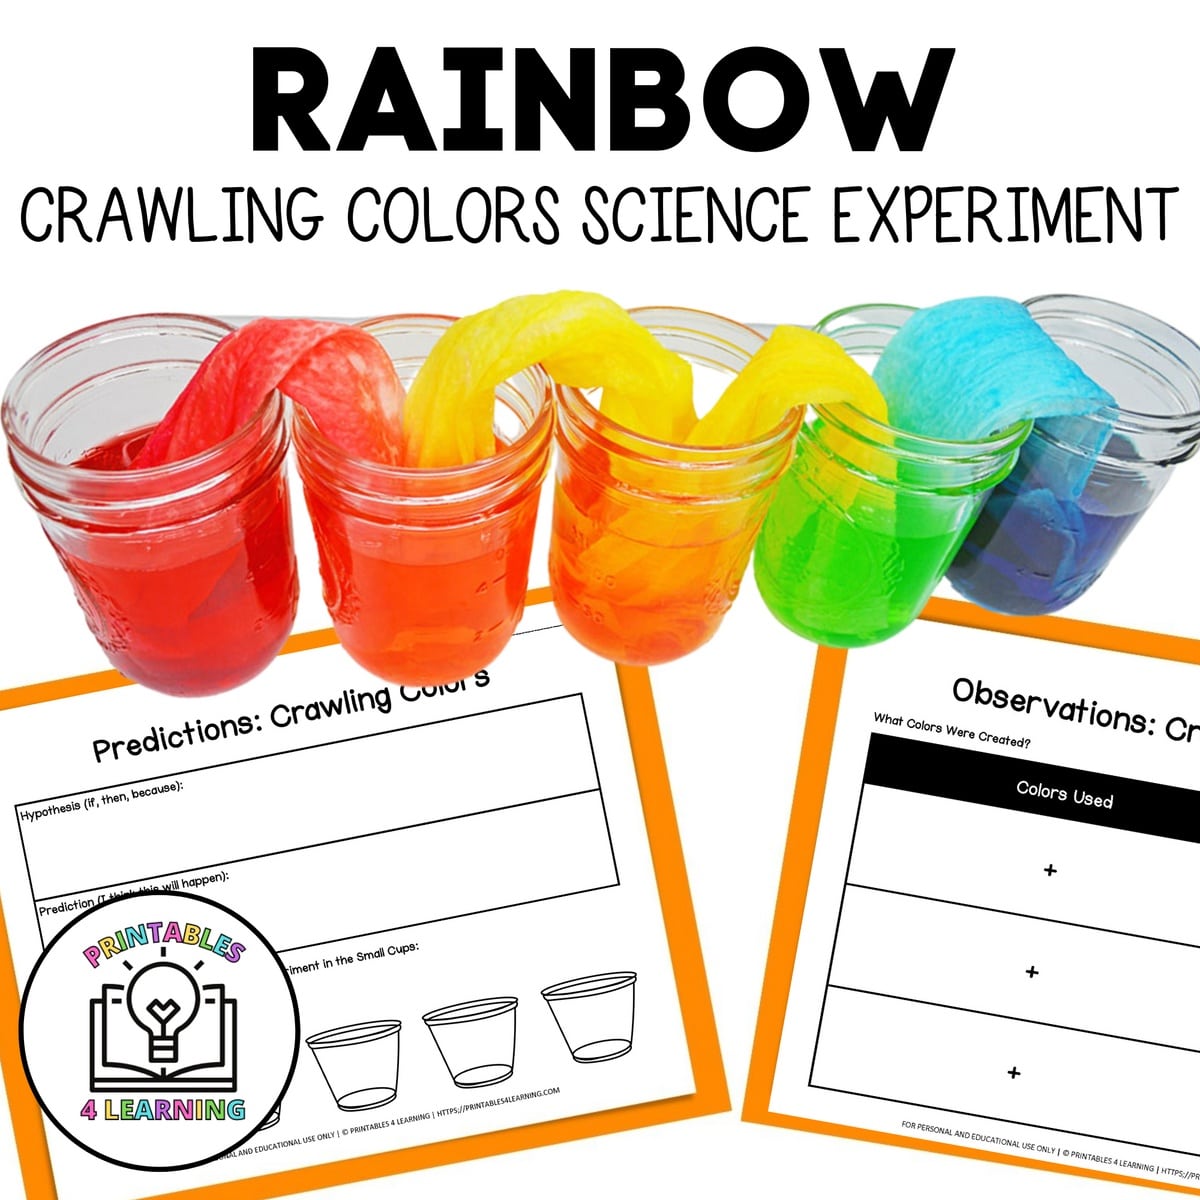 Crawling Colors Science Experiment: Capillary Action Color Mixing